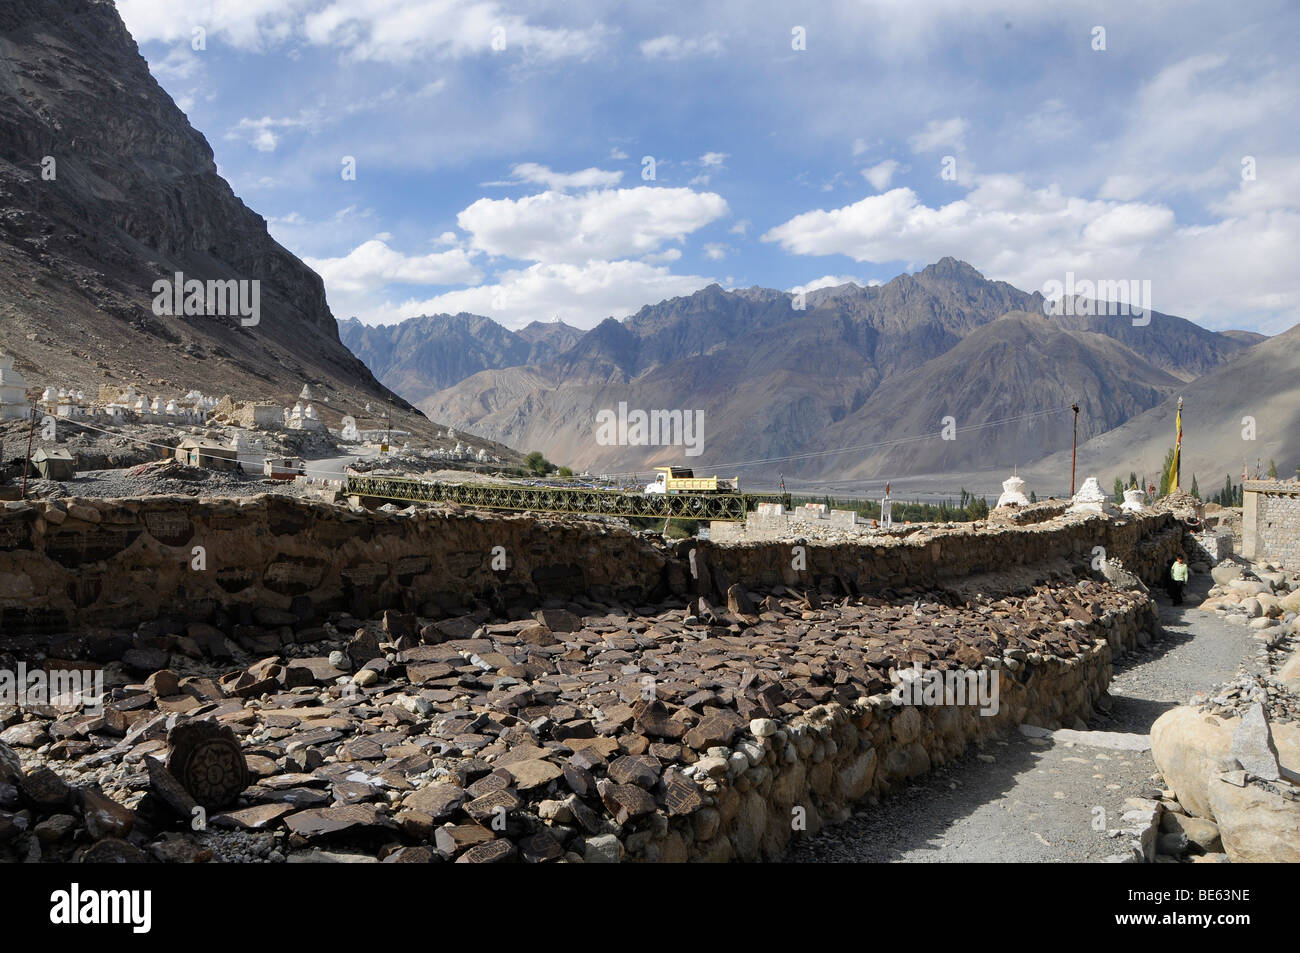 Mani (prayer inscribed) stones with Mantras on a Mani wall in the Hundar oasis, Nubra Valley, Ladakh, Jammu and Kashmir, North  Stock Photo